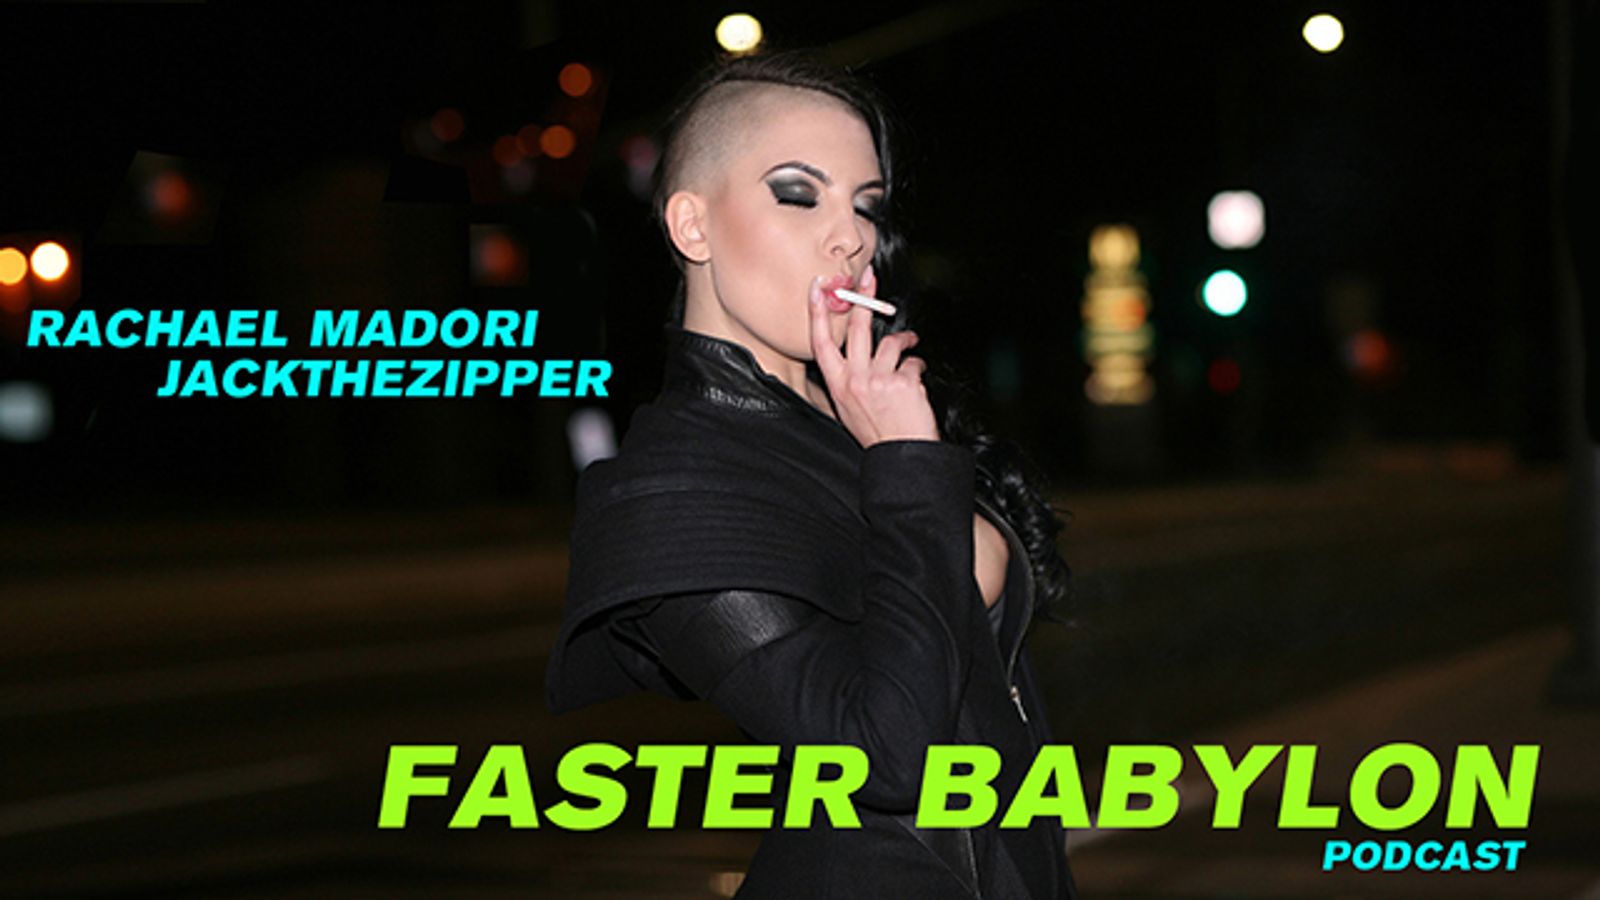 Rachael Madori Interviewed on The Faster Babylon Podcast